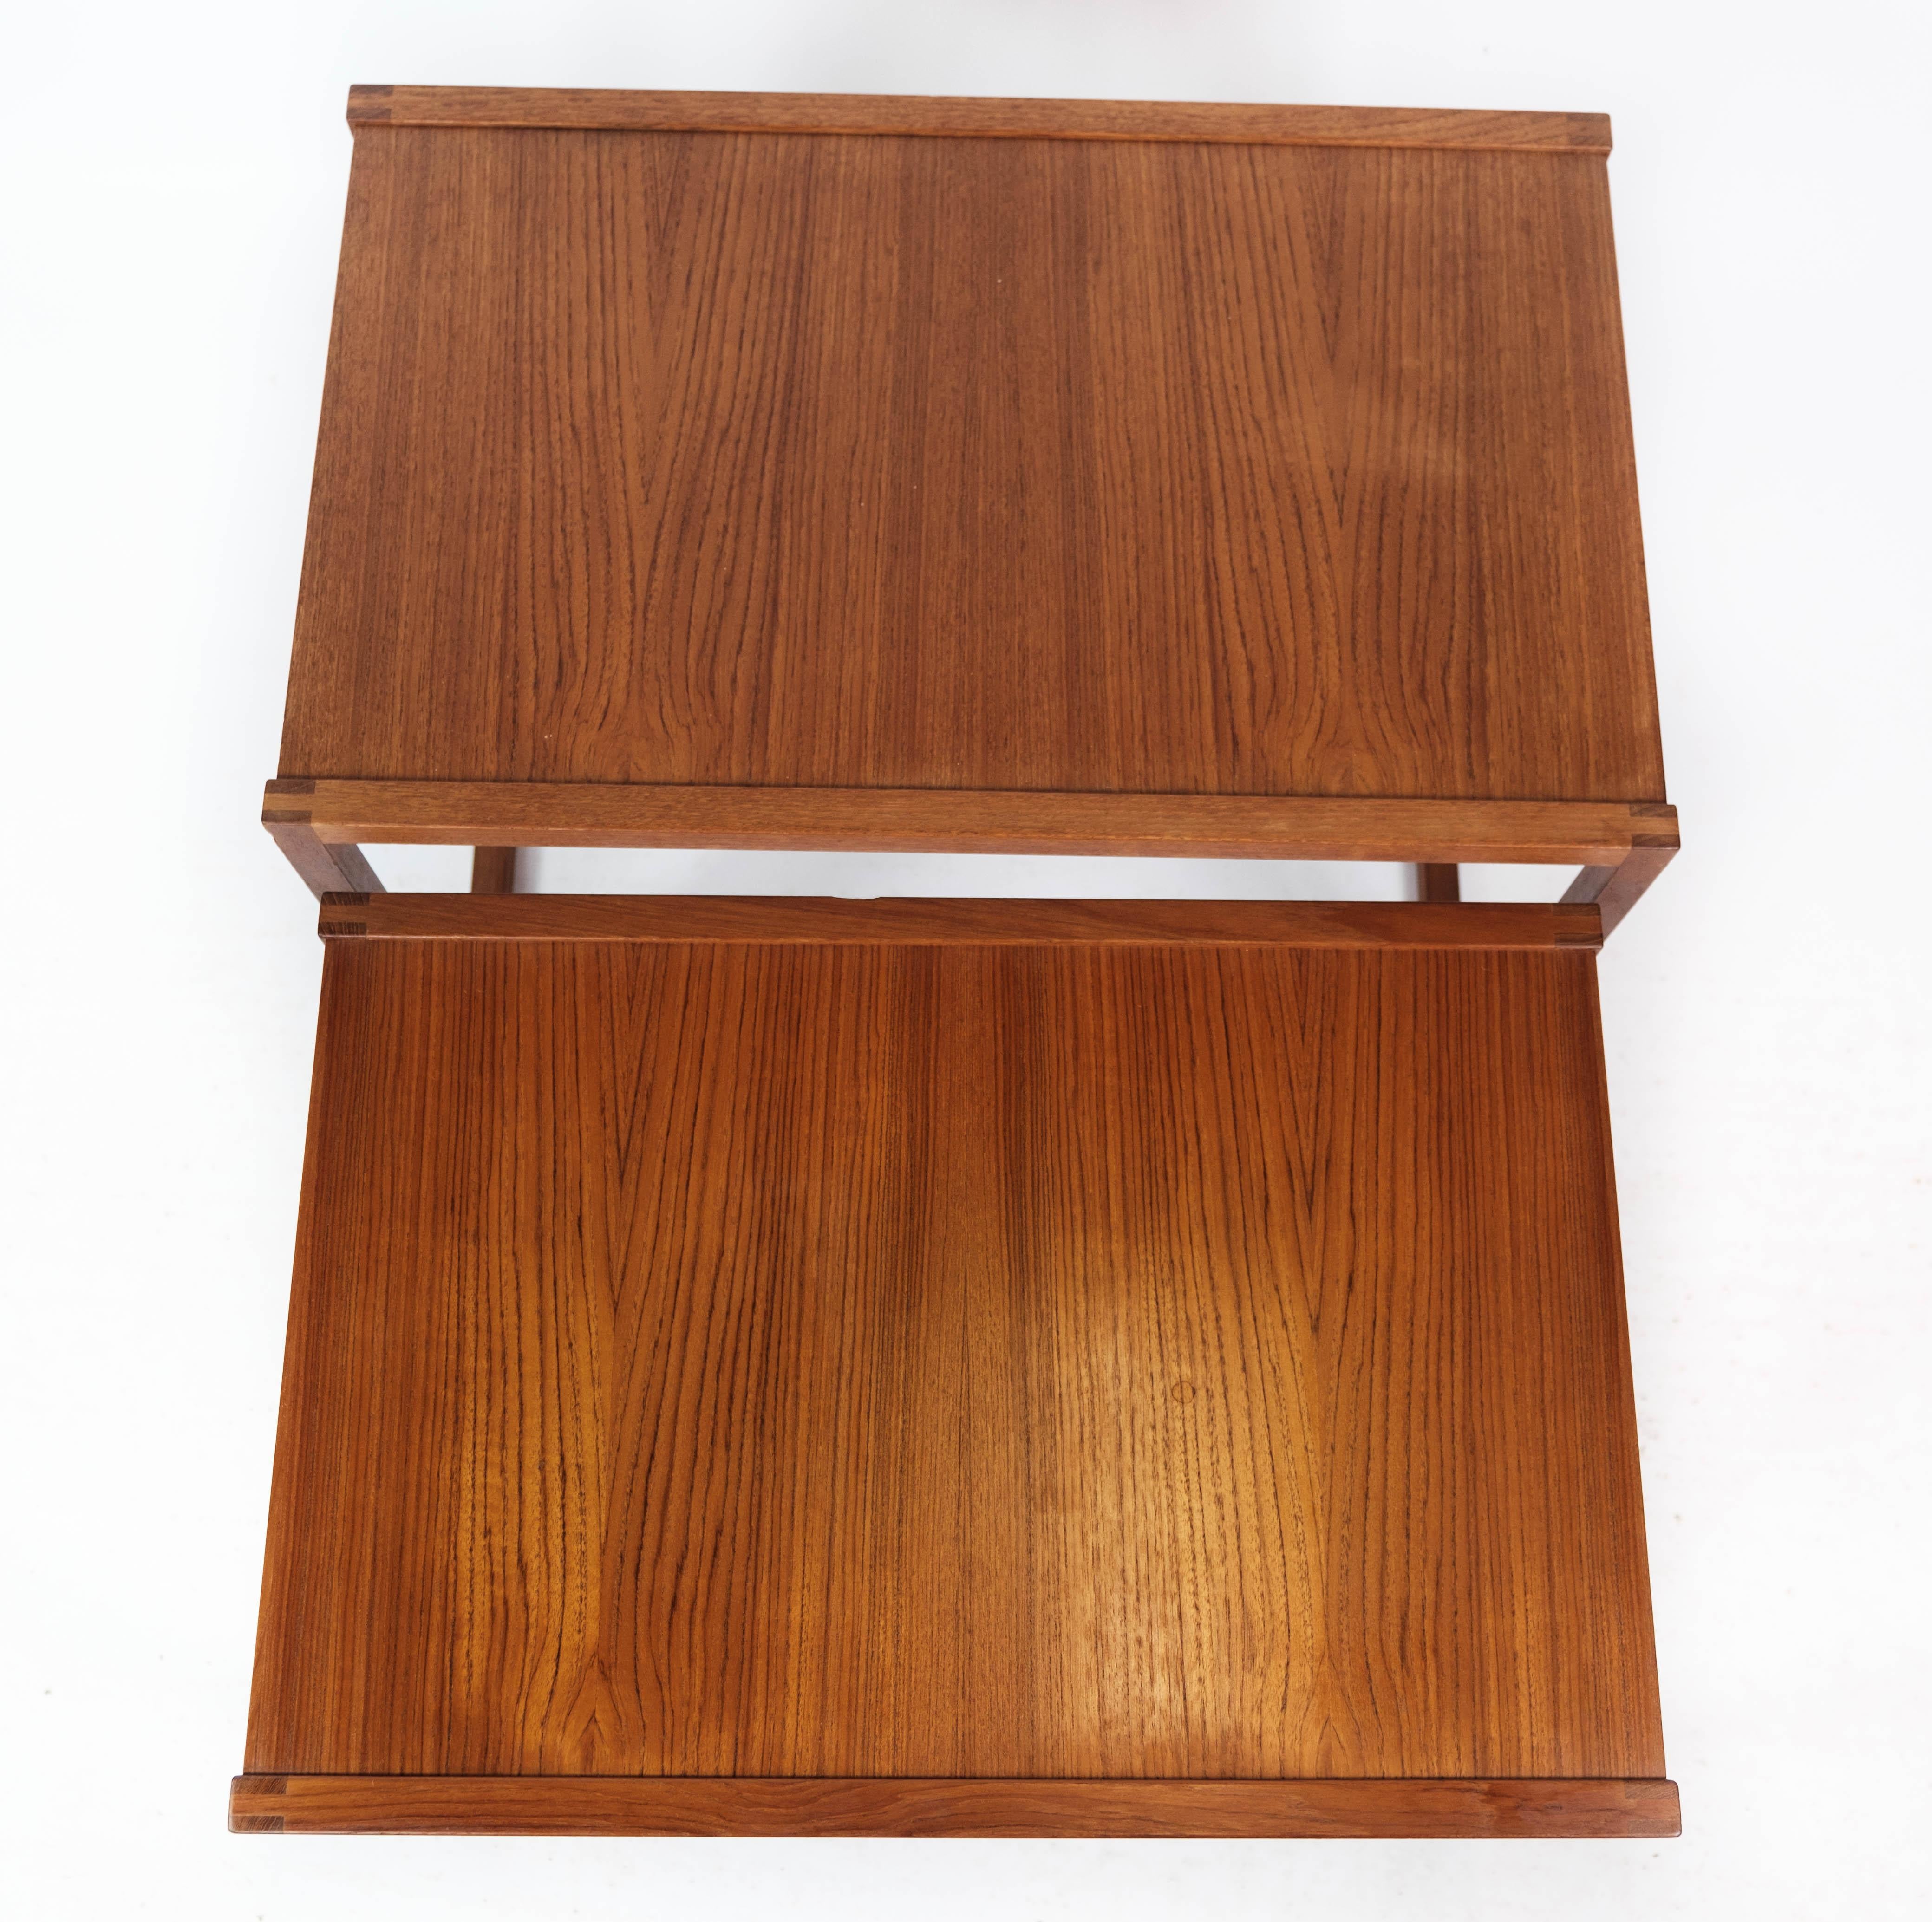 Nesting Table in Teak of Danish Design from the 1960s For Sale 4